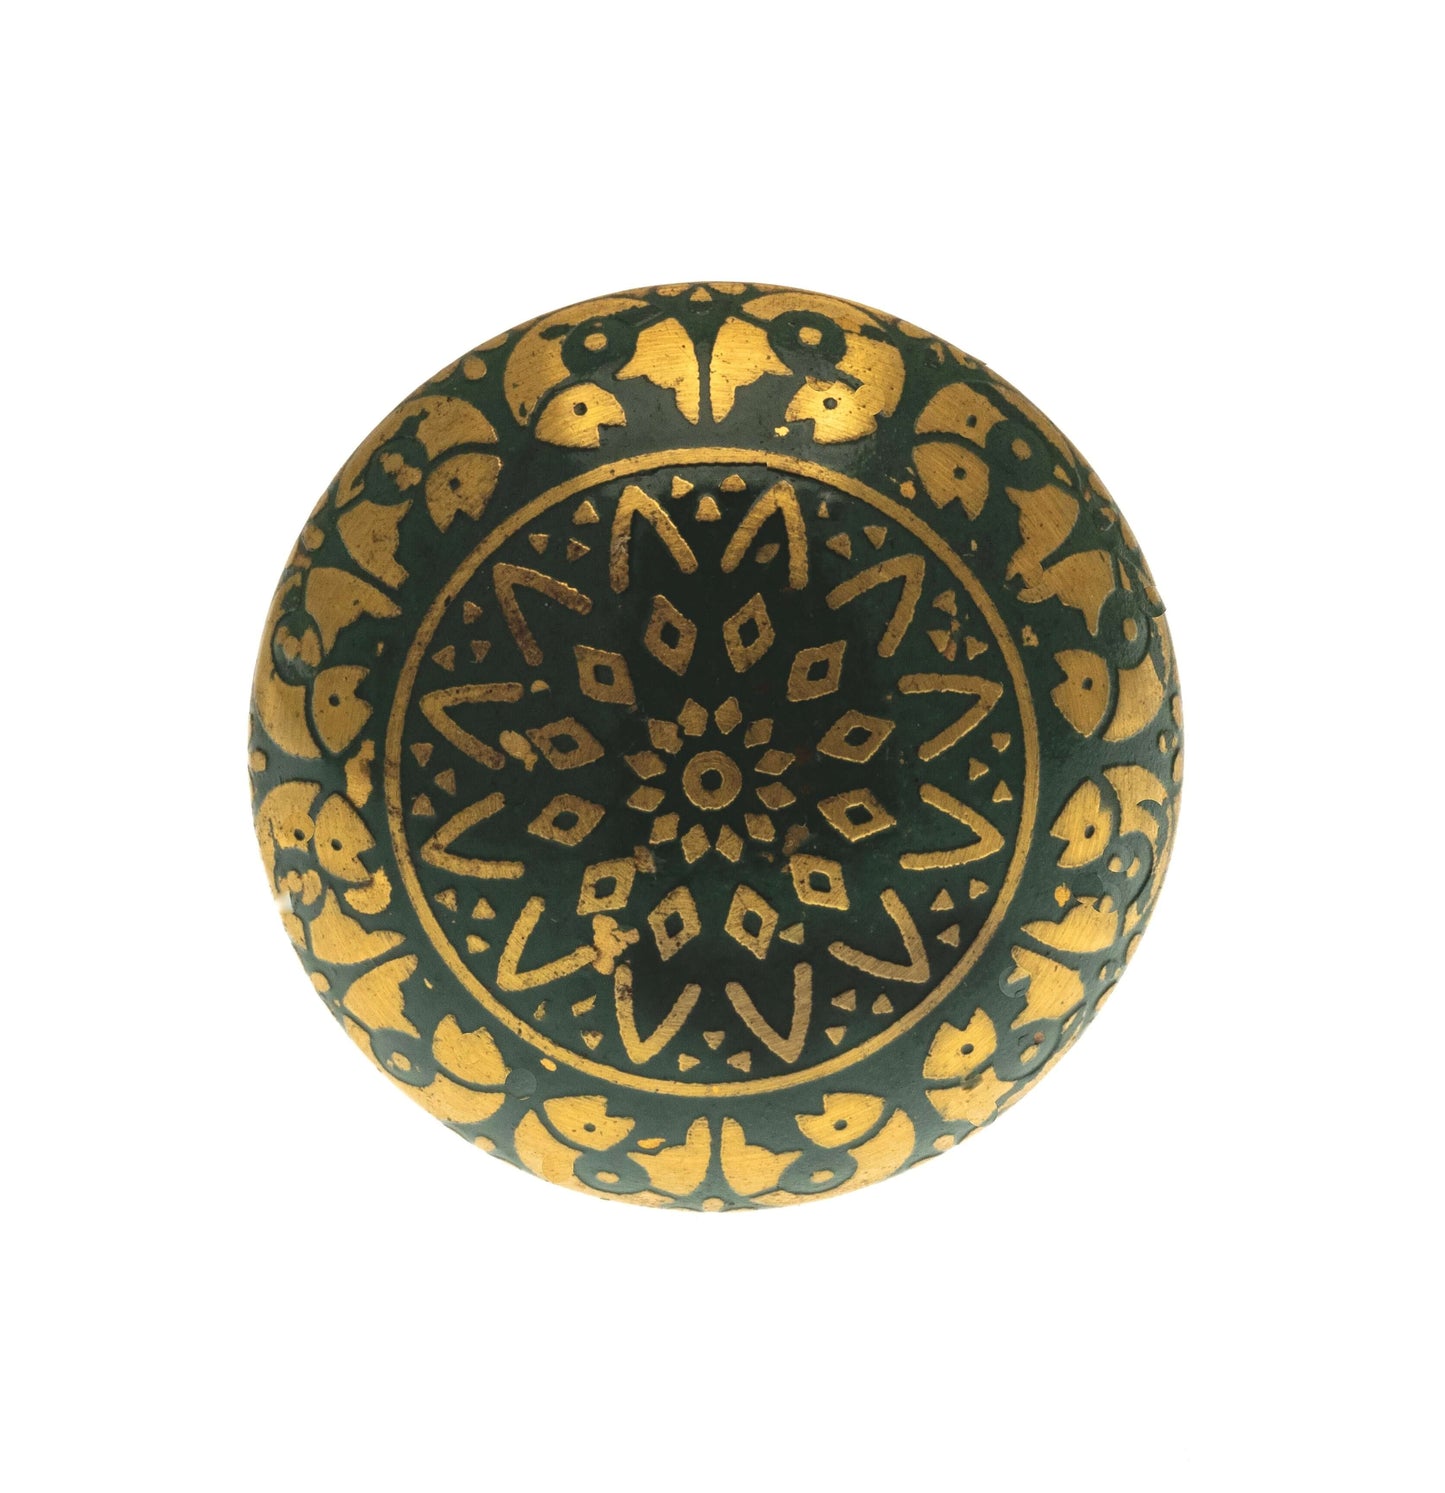 Etched Patterned Brass Dome Moroccan Style Knob for Cupboards in Green and Gold